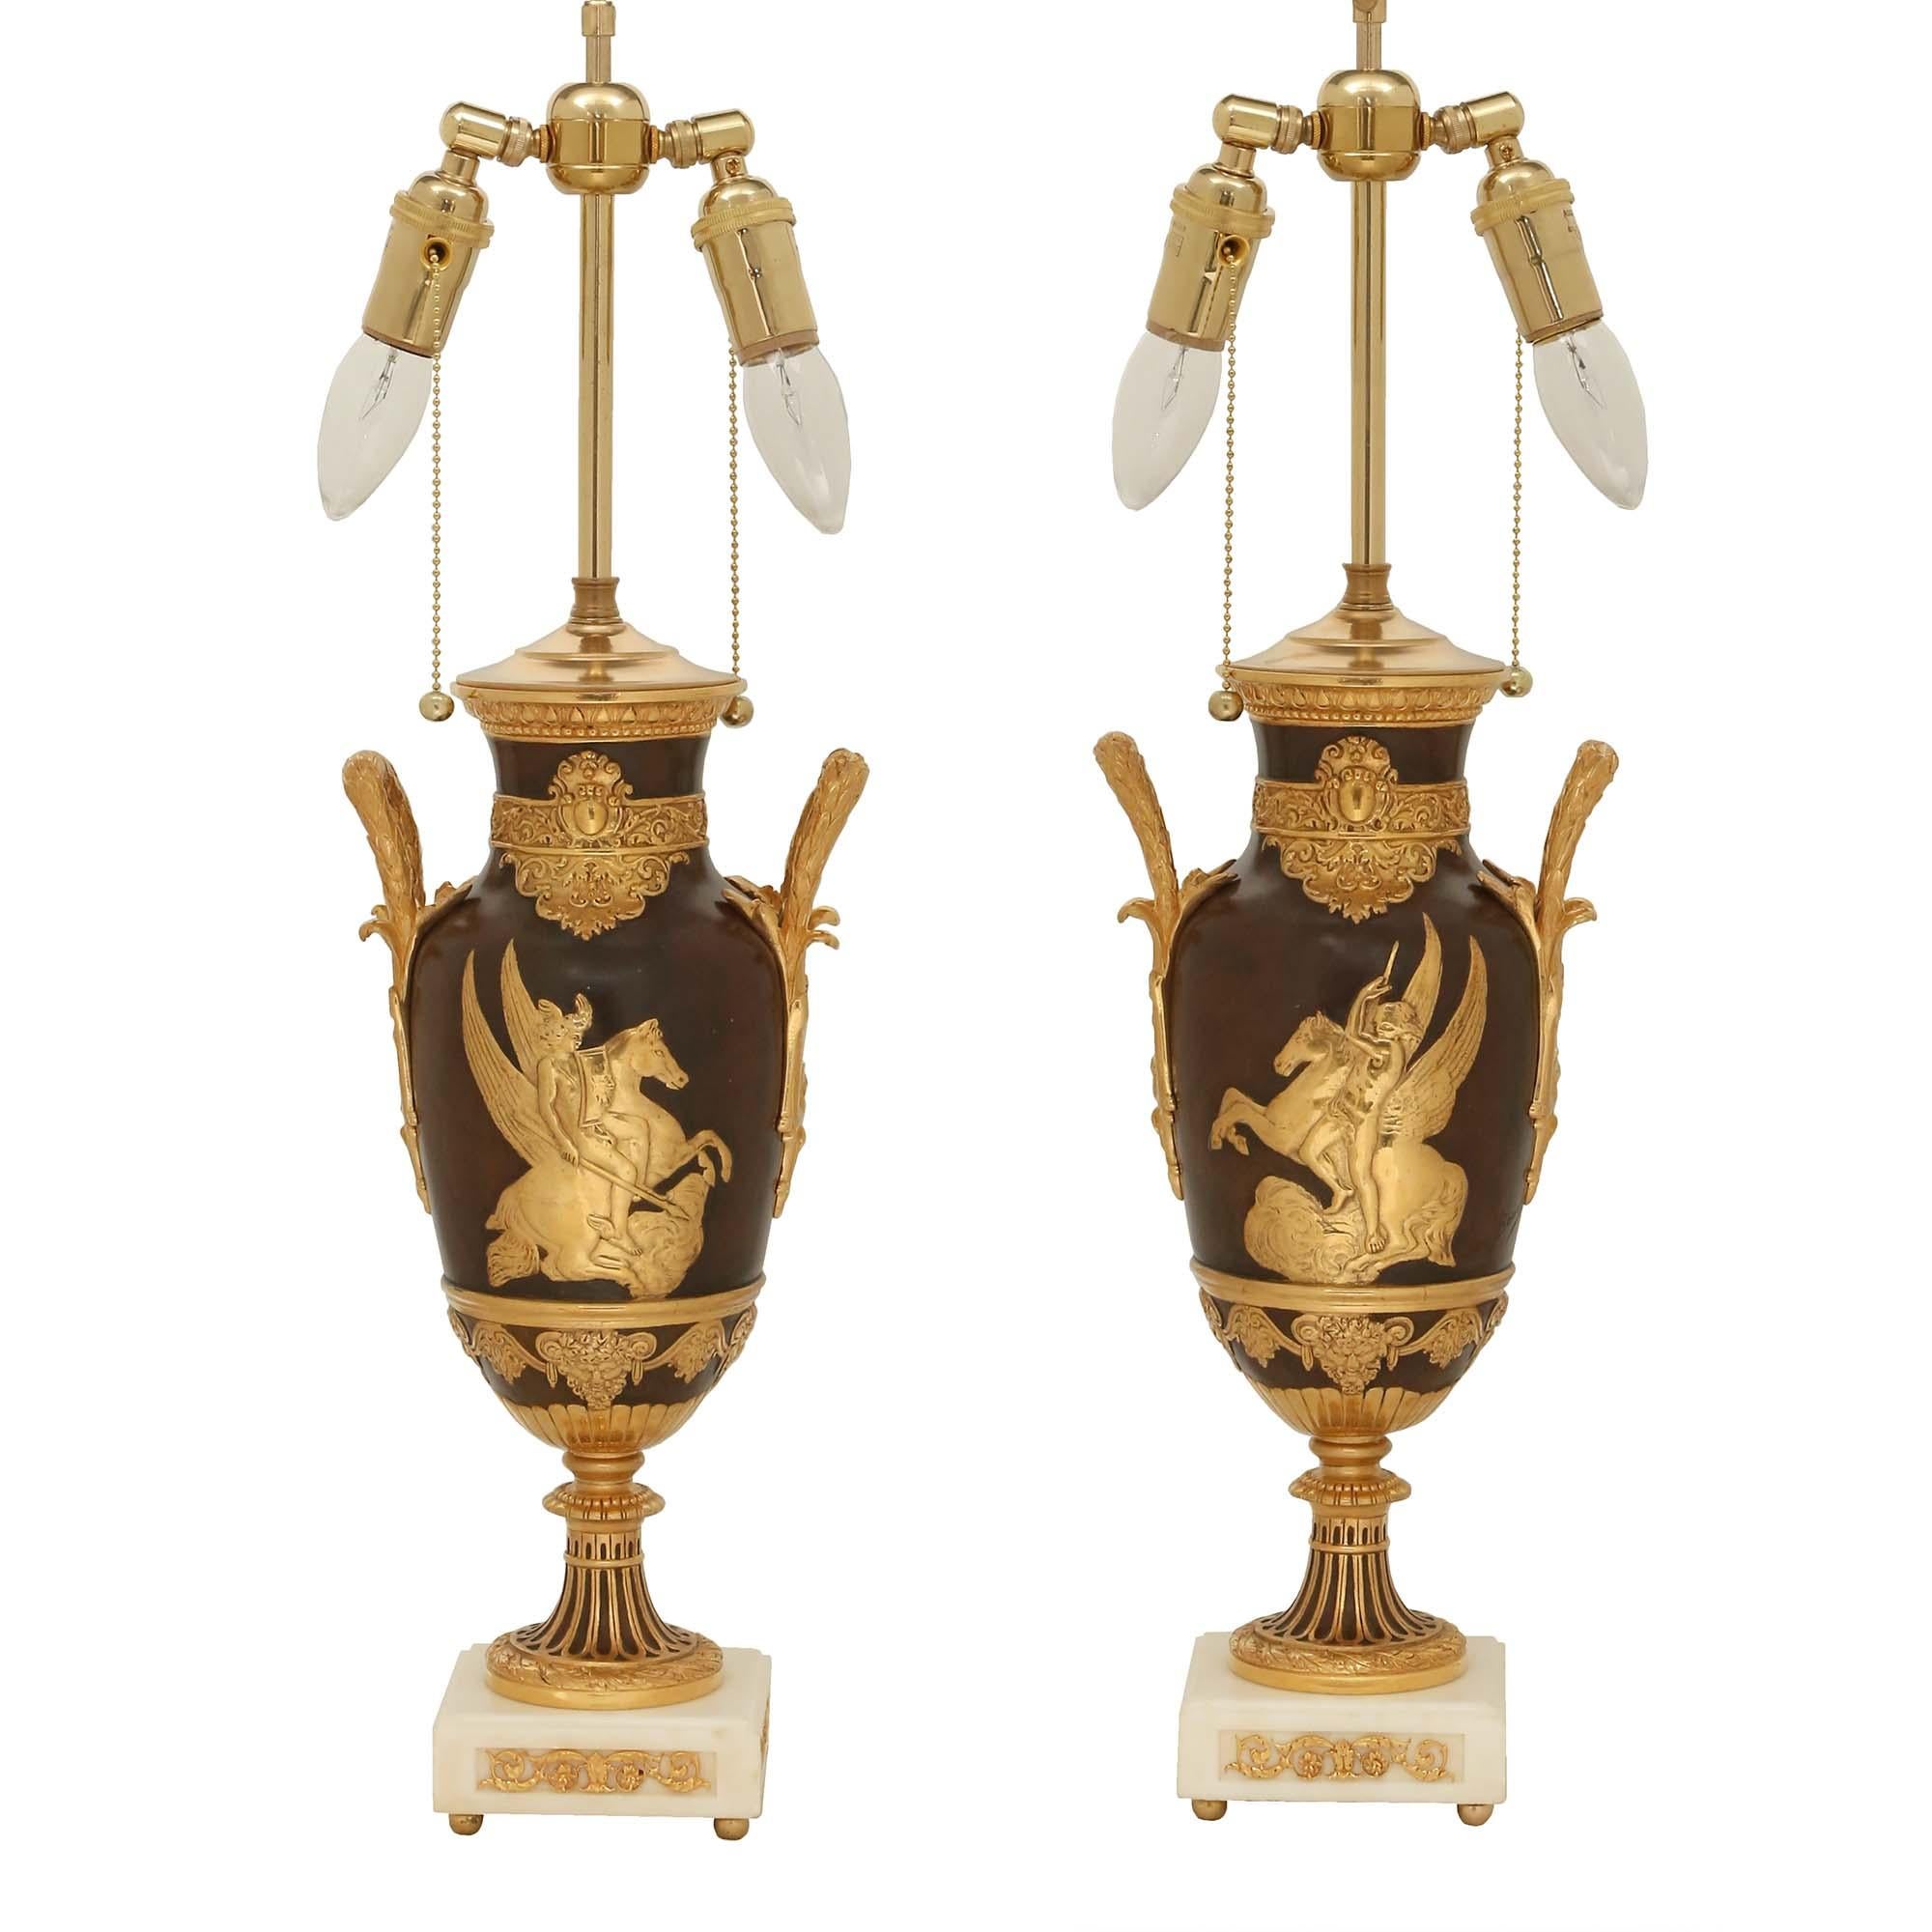 A stunning true pair of French 19th century Neo-Classical st. patinated bronze, ormolu and marble urns mounted into lamps, signed LÉON BOUCHER. Each lamp is raised by a square white Carrara marble base with ormolu ball feet and an elegant pierced